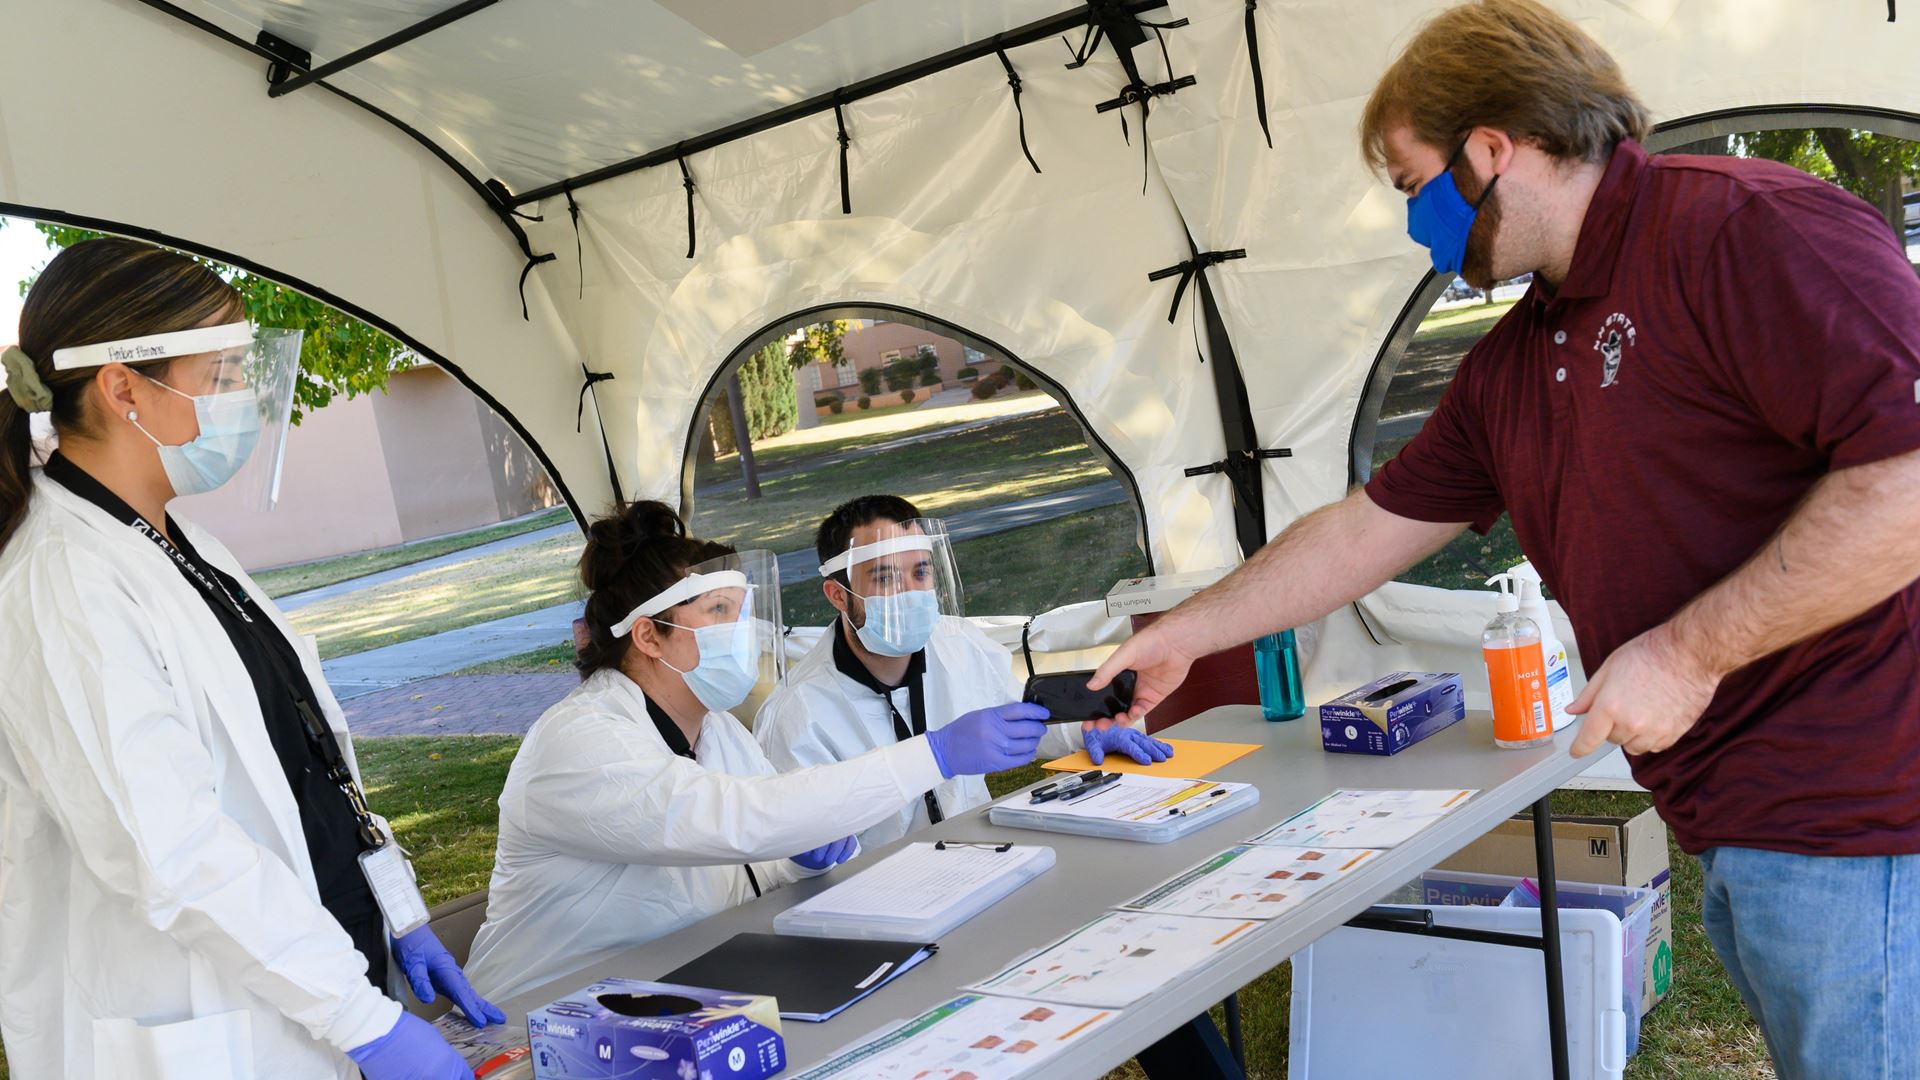 NMSU, TriCore partnership provides research opportunities during COVID-19 pandemic